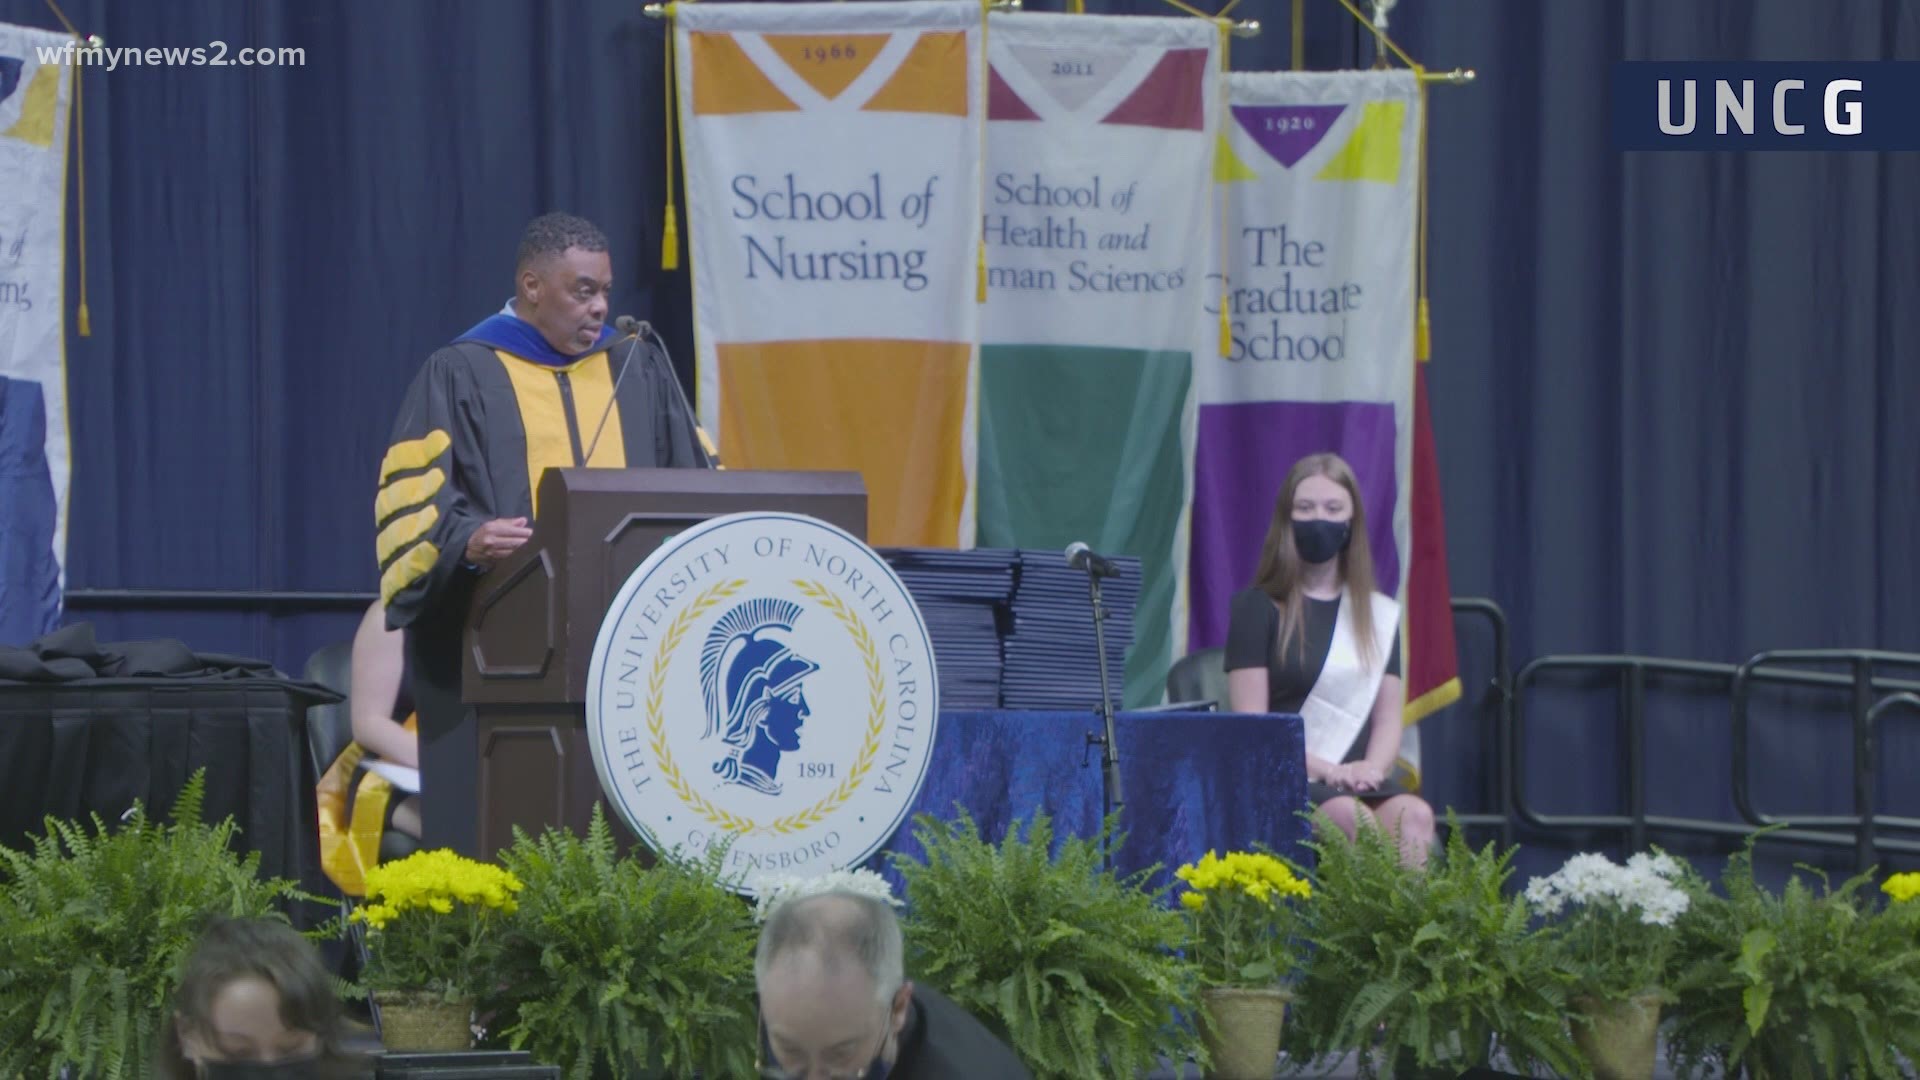 UNCG held a socially distanced graduation for the class of 2021 on Friday, they're honoring the class of 2020 on Saturday.